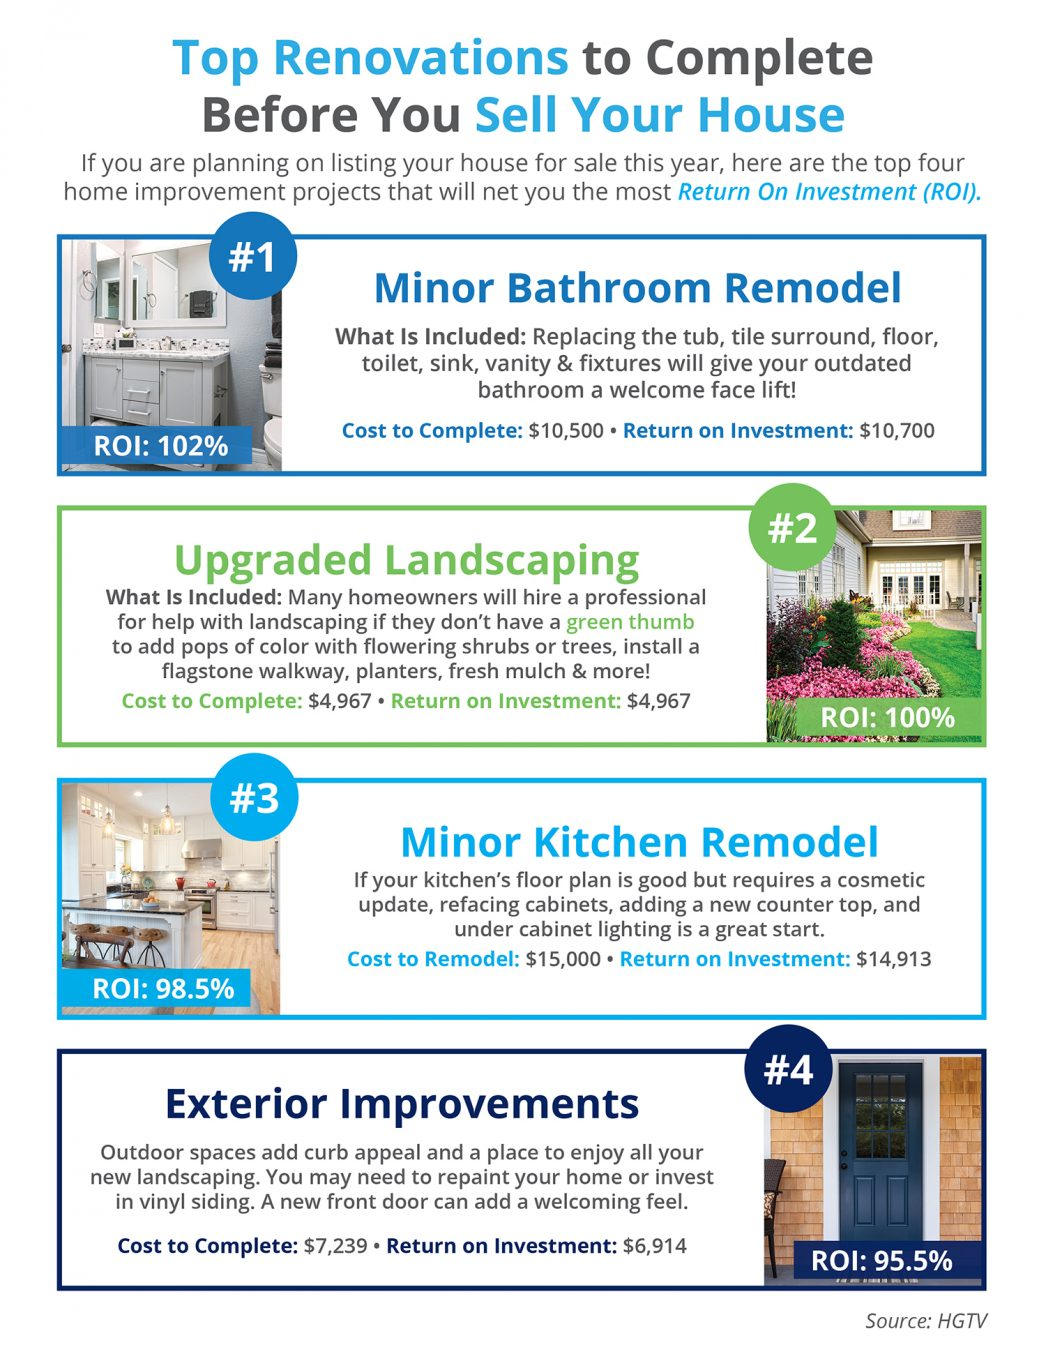 Top Renovations to Complete Before You Sell Your House [INFOGRAPHIC] | MyKCM